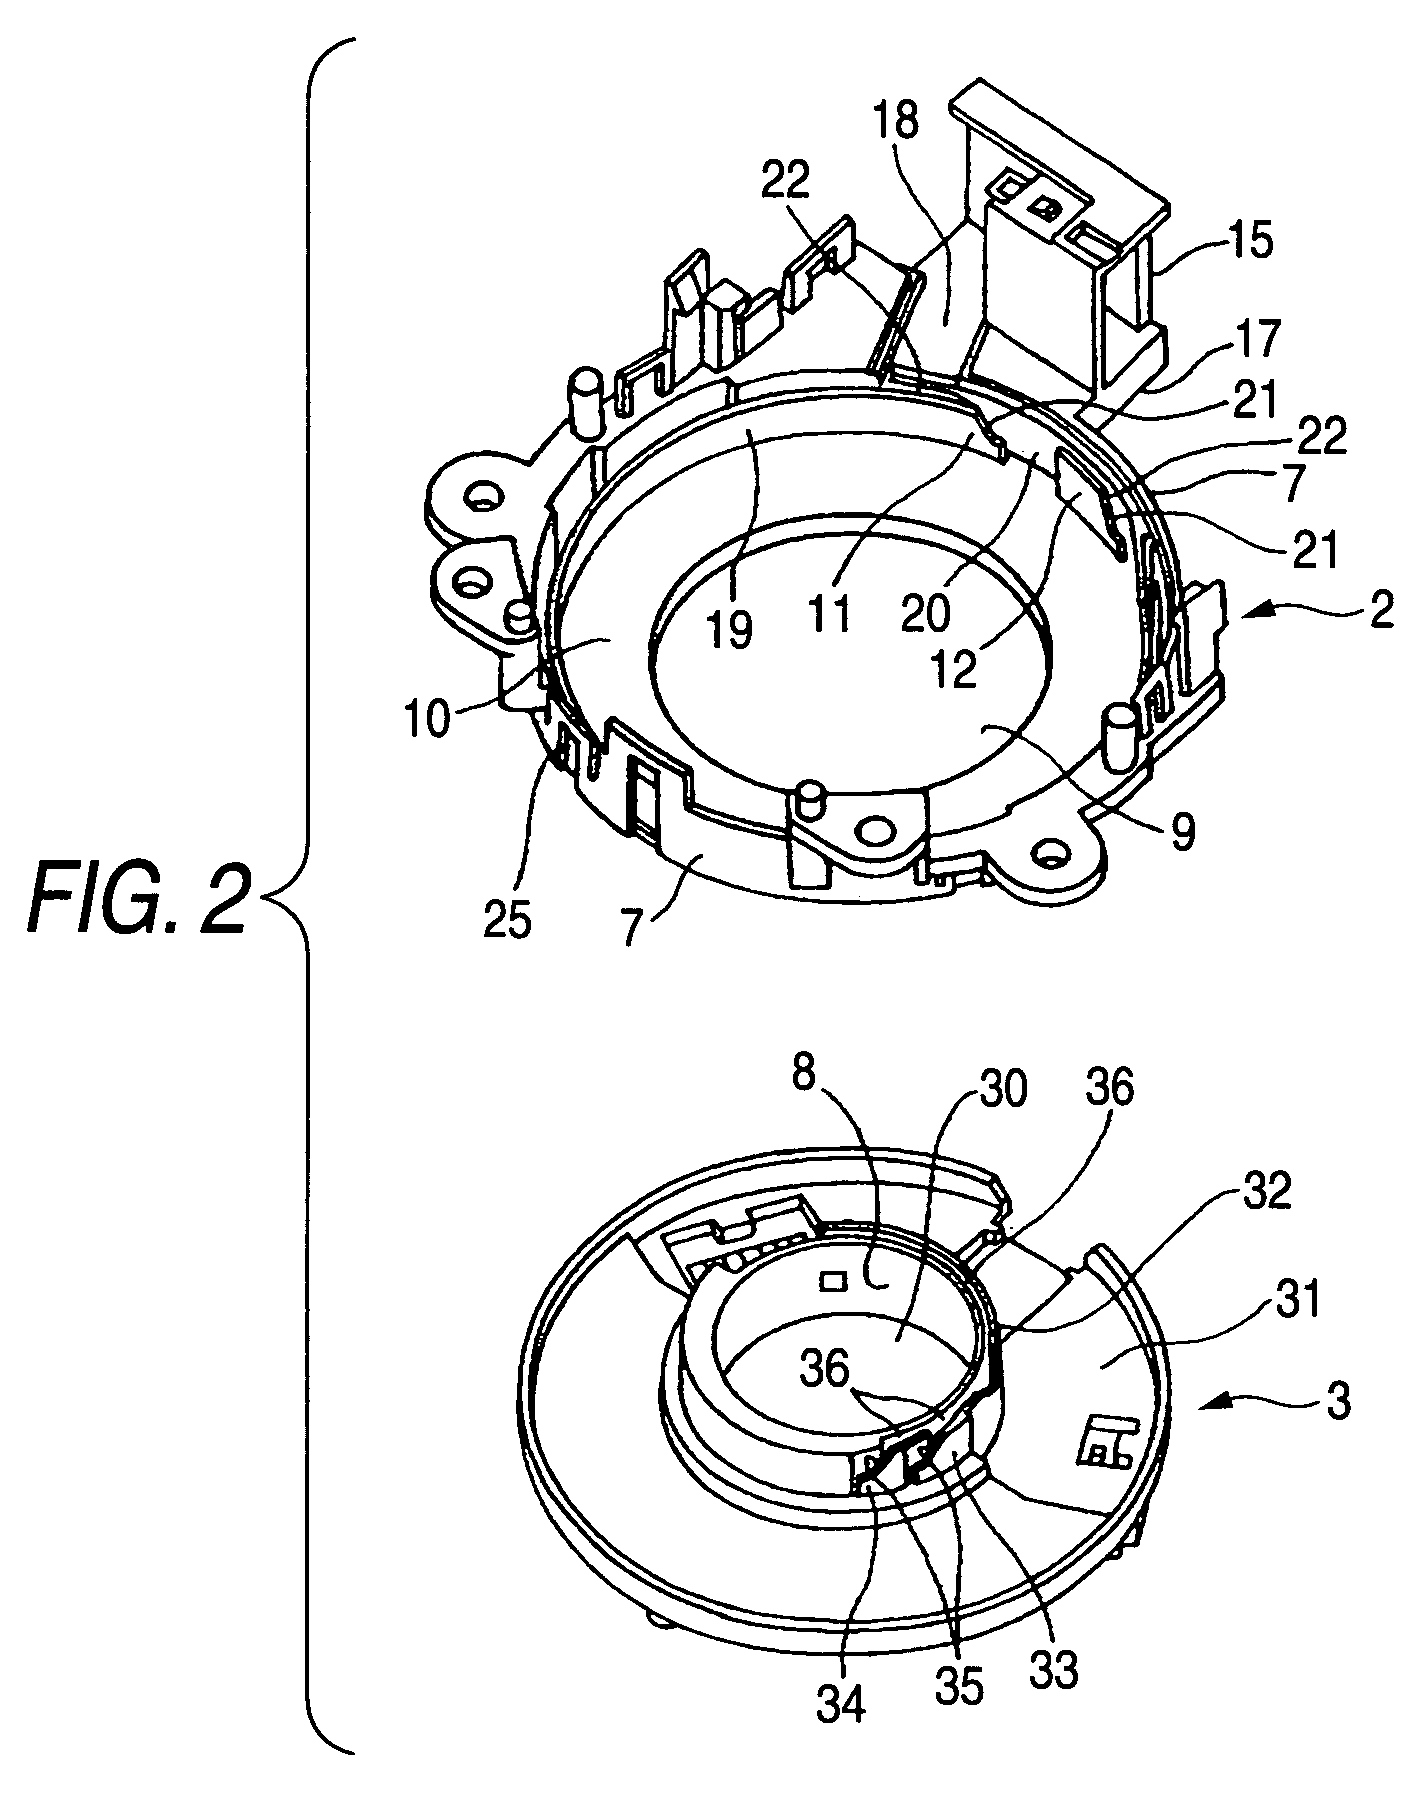 Rotary connector device